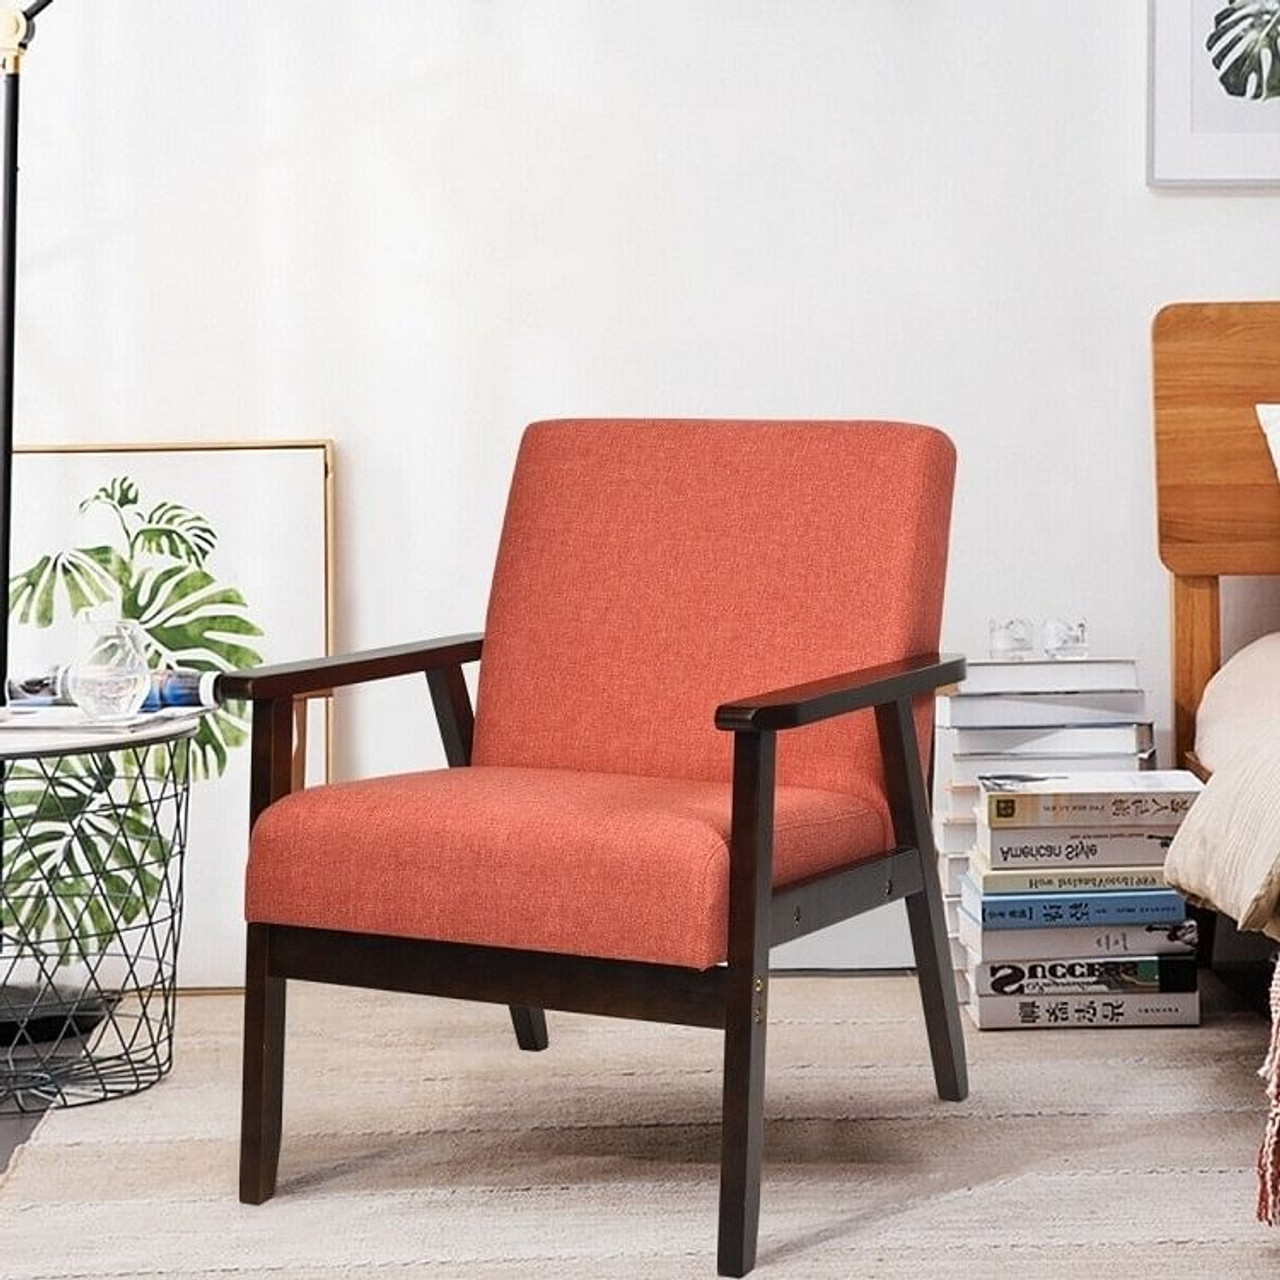 Retro Modern Classic Orange Linen Wide Accent Chair with Espresso Wood Frame